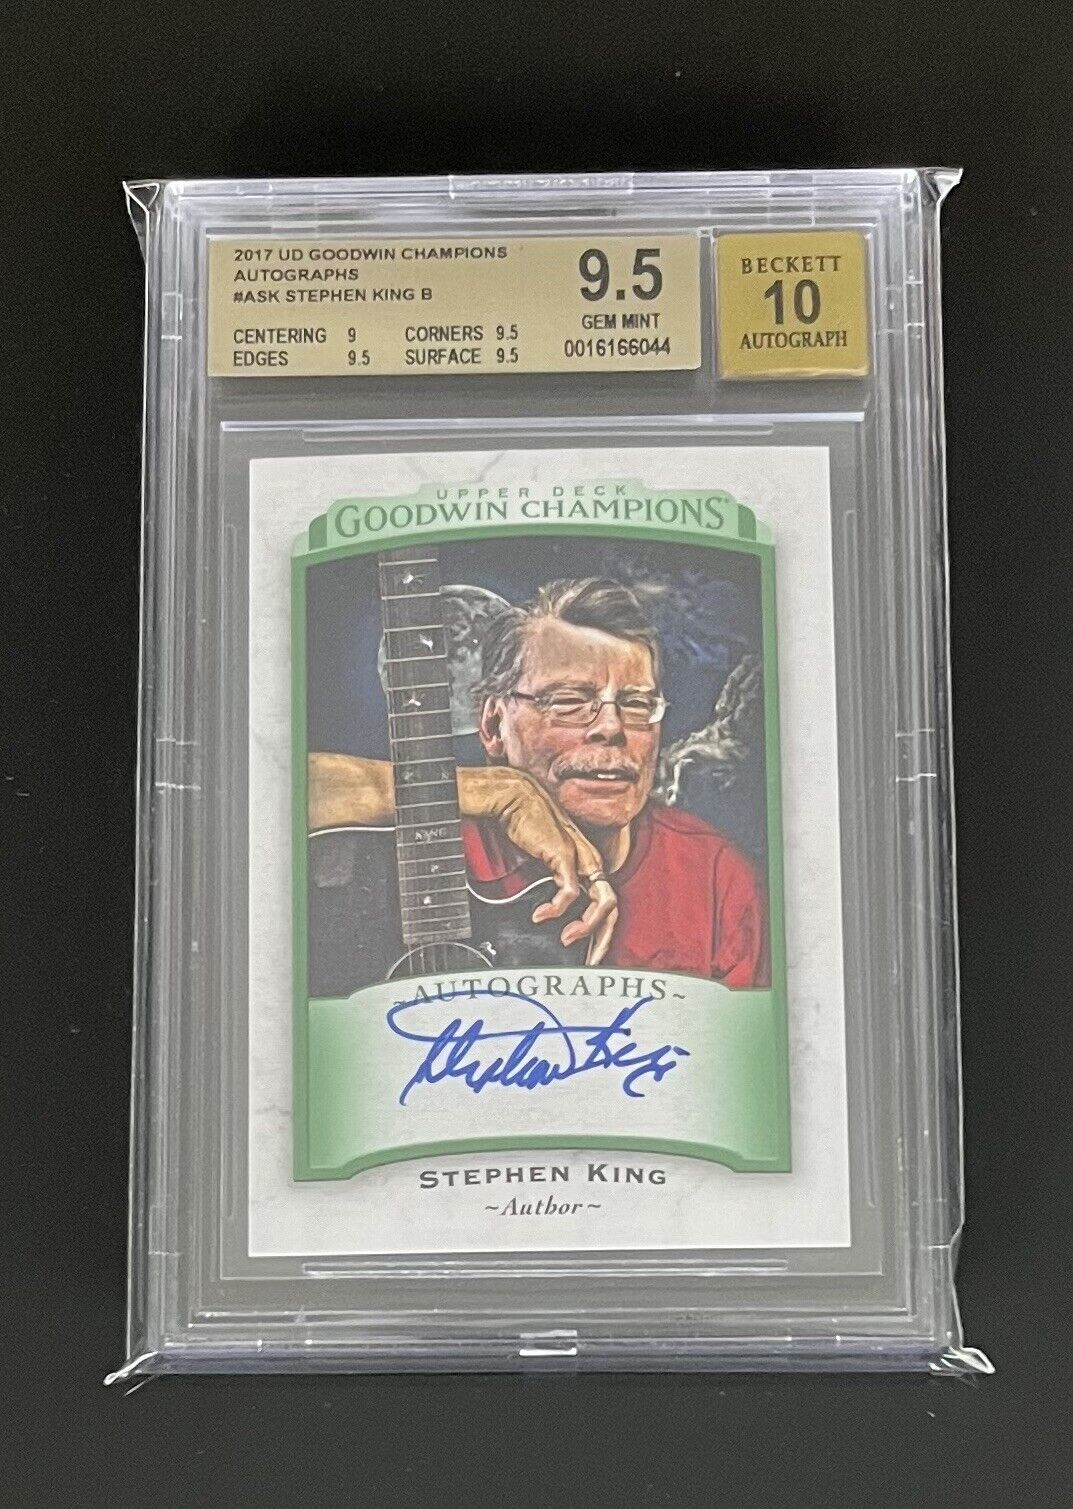 2017 UD Goodwin Champions STEPHEN KING On Card Autograph SP BGS 9.5 / 10 Gem